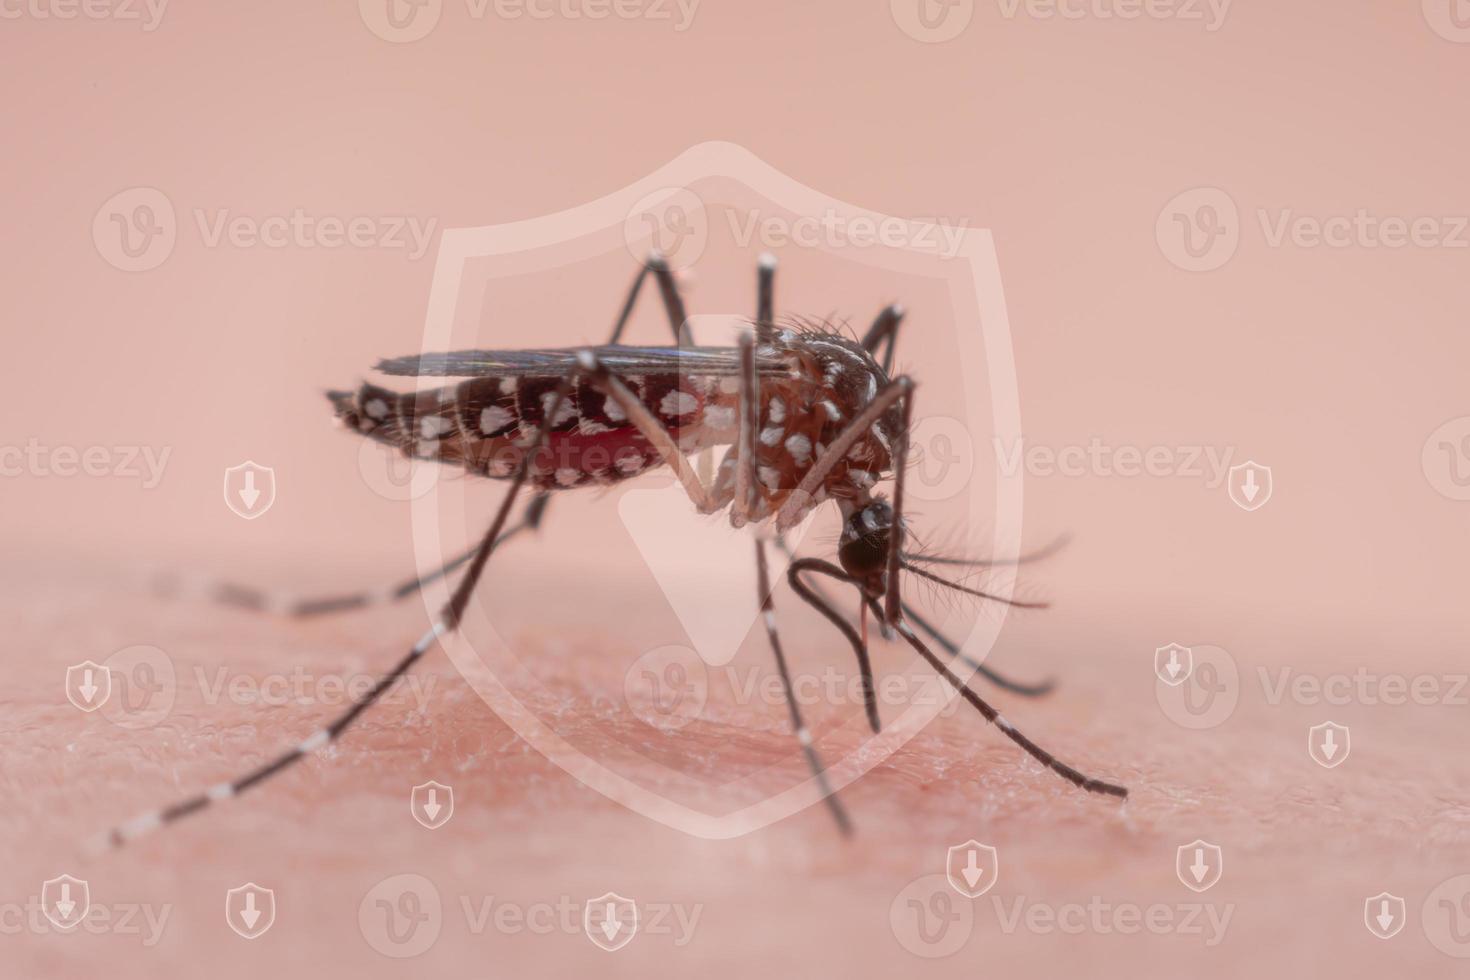 Mosquitoes are natural blood-sucking insects that inflict pain on human health, and biologically they carry malaria, dengue and Zika fever. photo